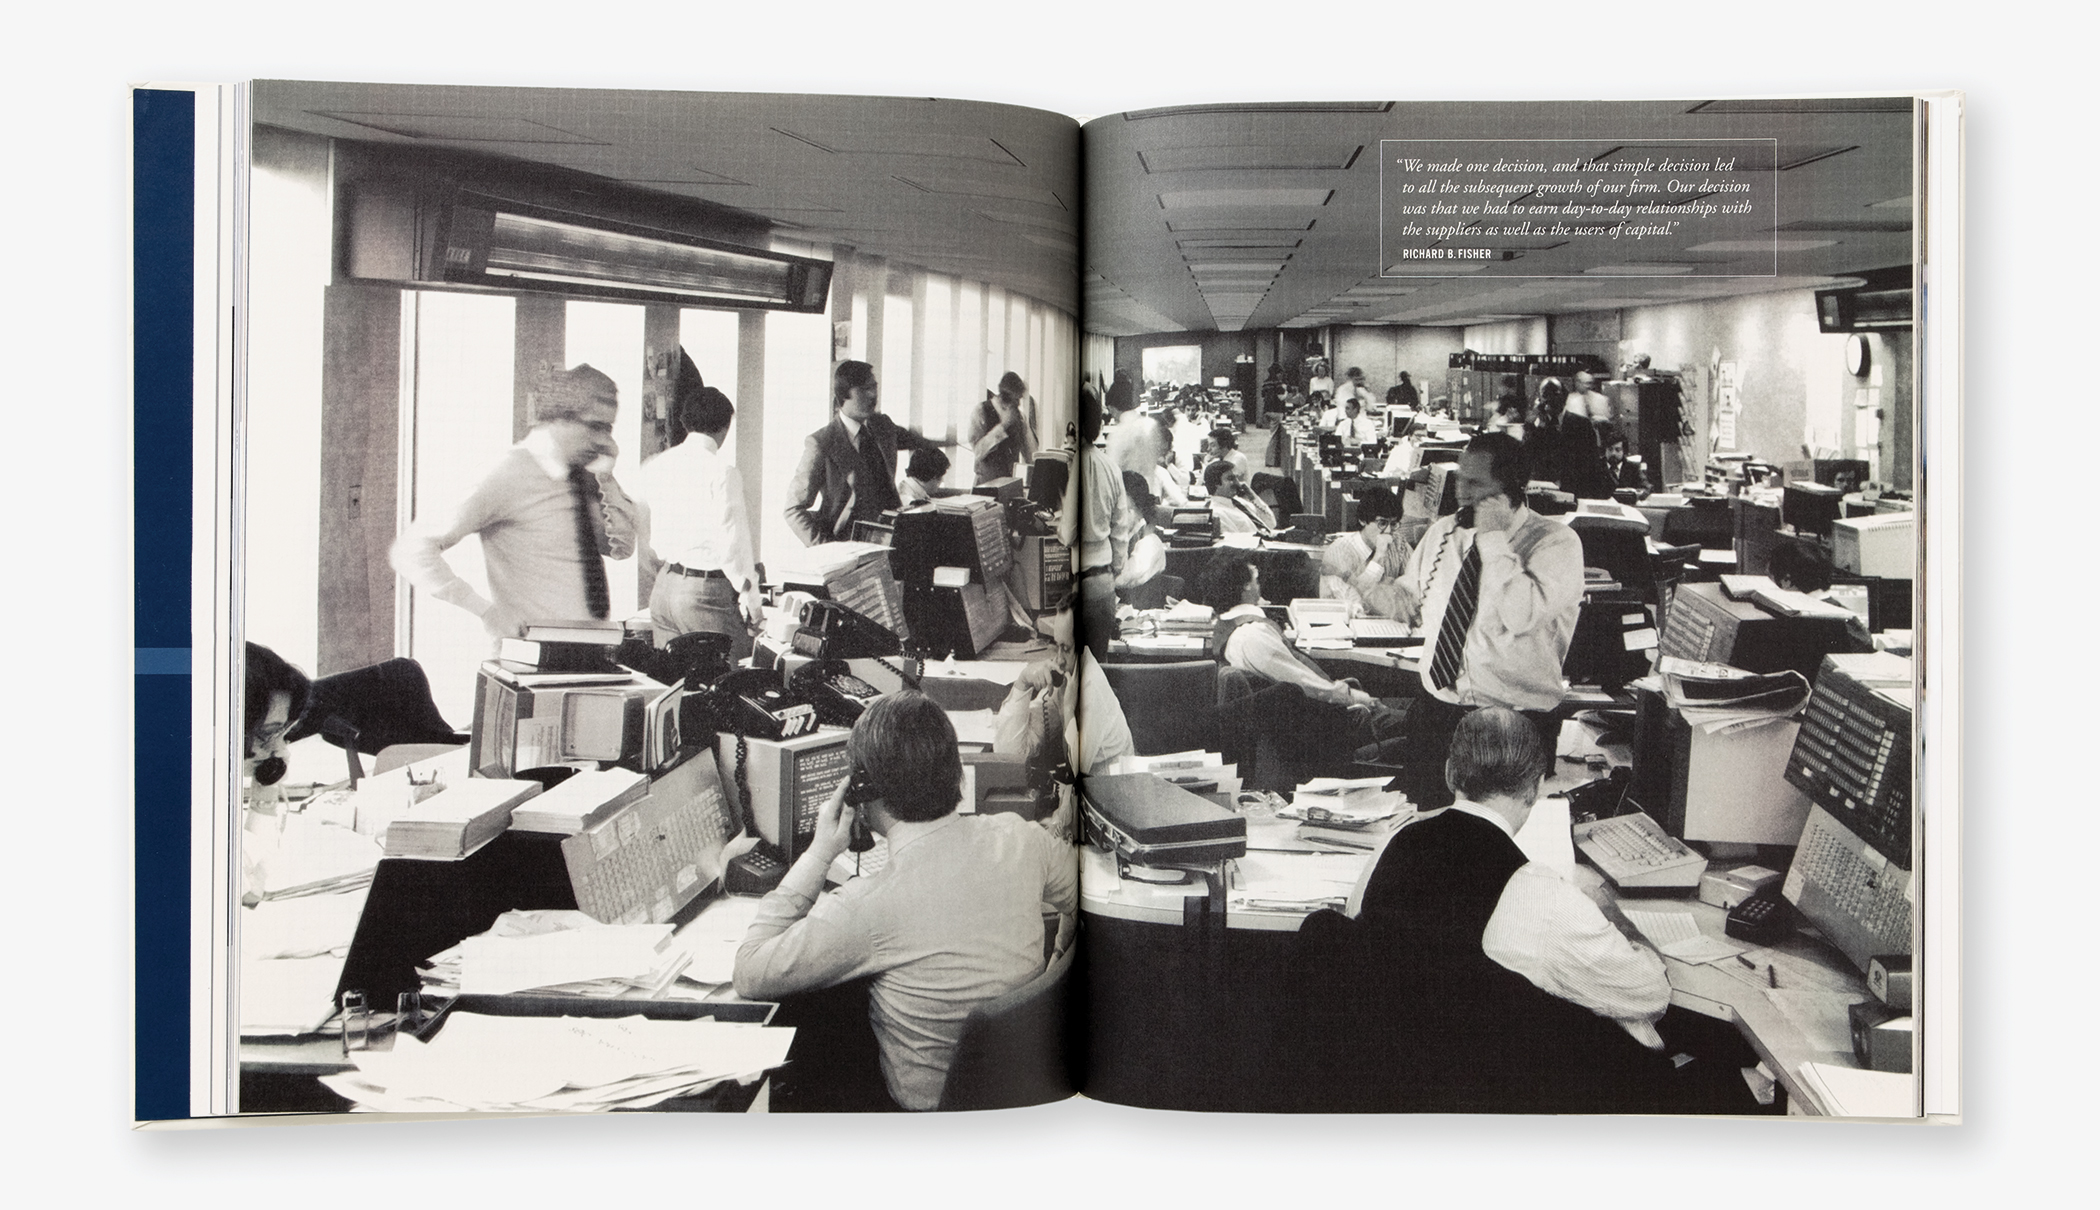 Pages from the Morgan Stanley 75th anniversary commemorative book showing a wide view of a crowded trading room.